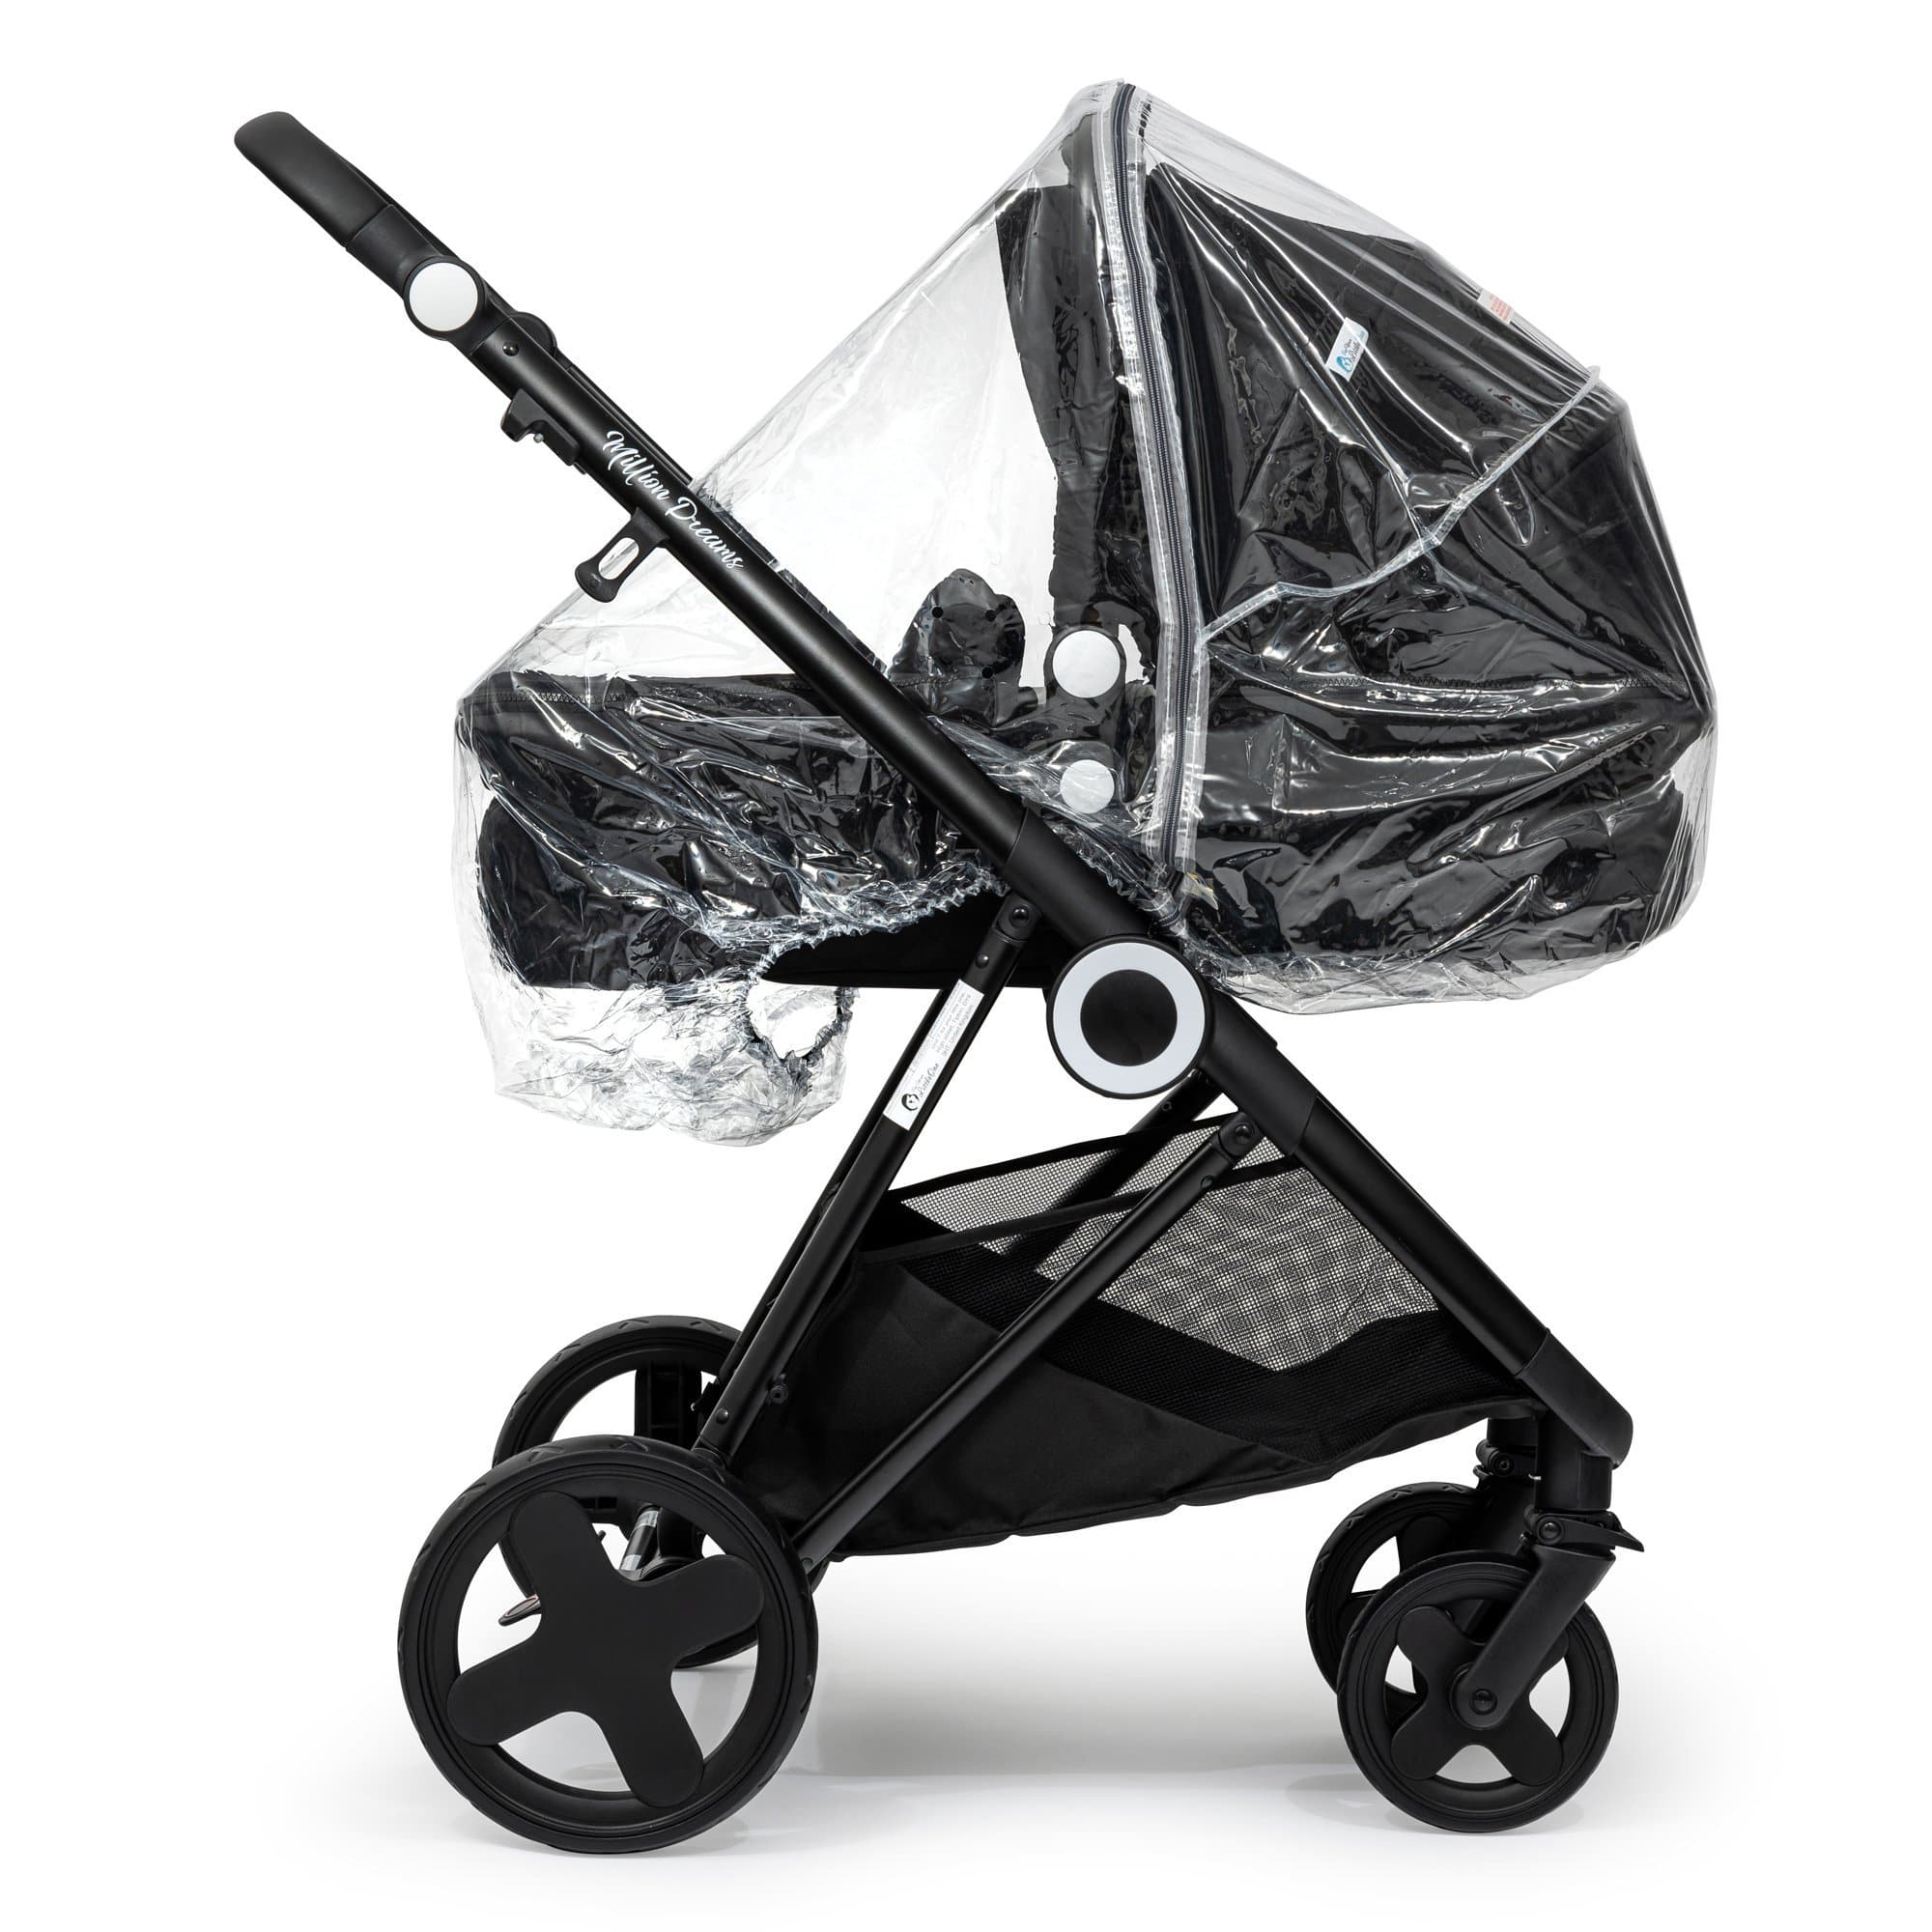 2 in 1 Rain Cover Compatible with Esprit - Fits All Models - For Your Little One